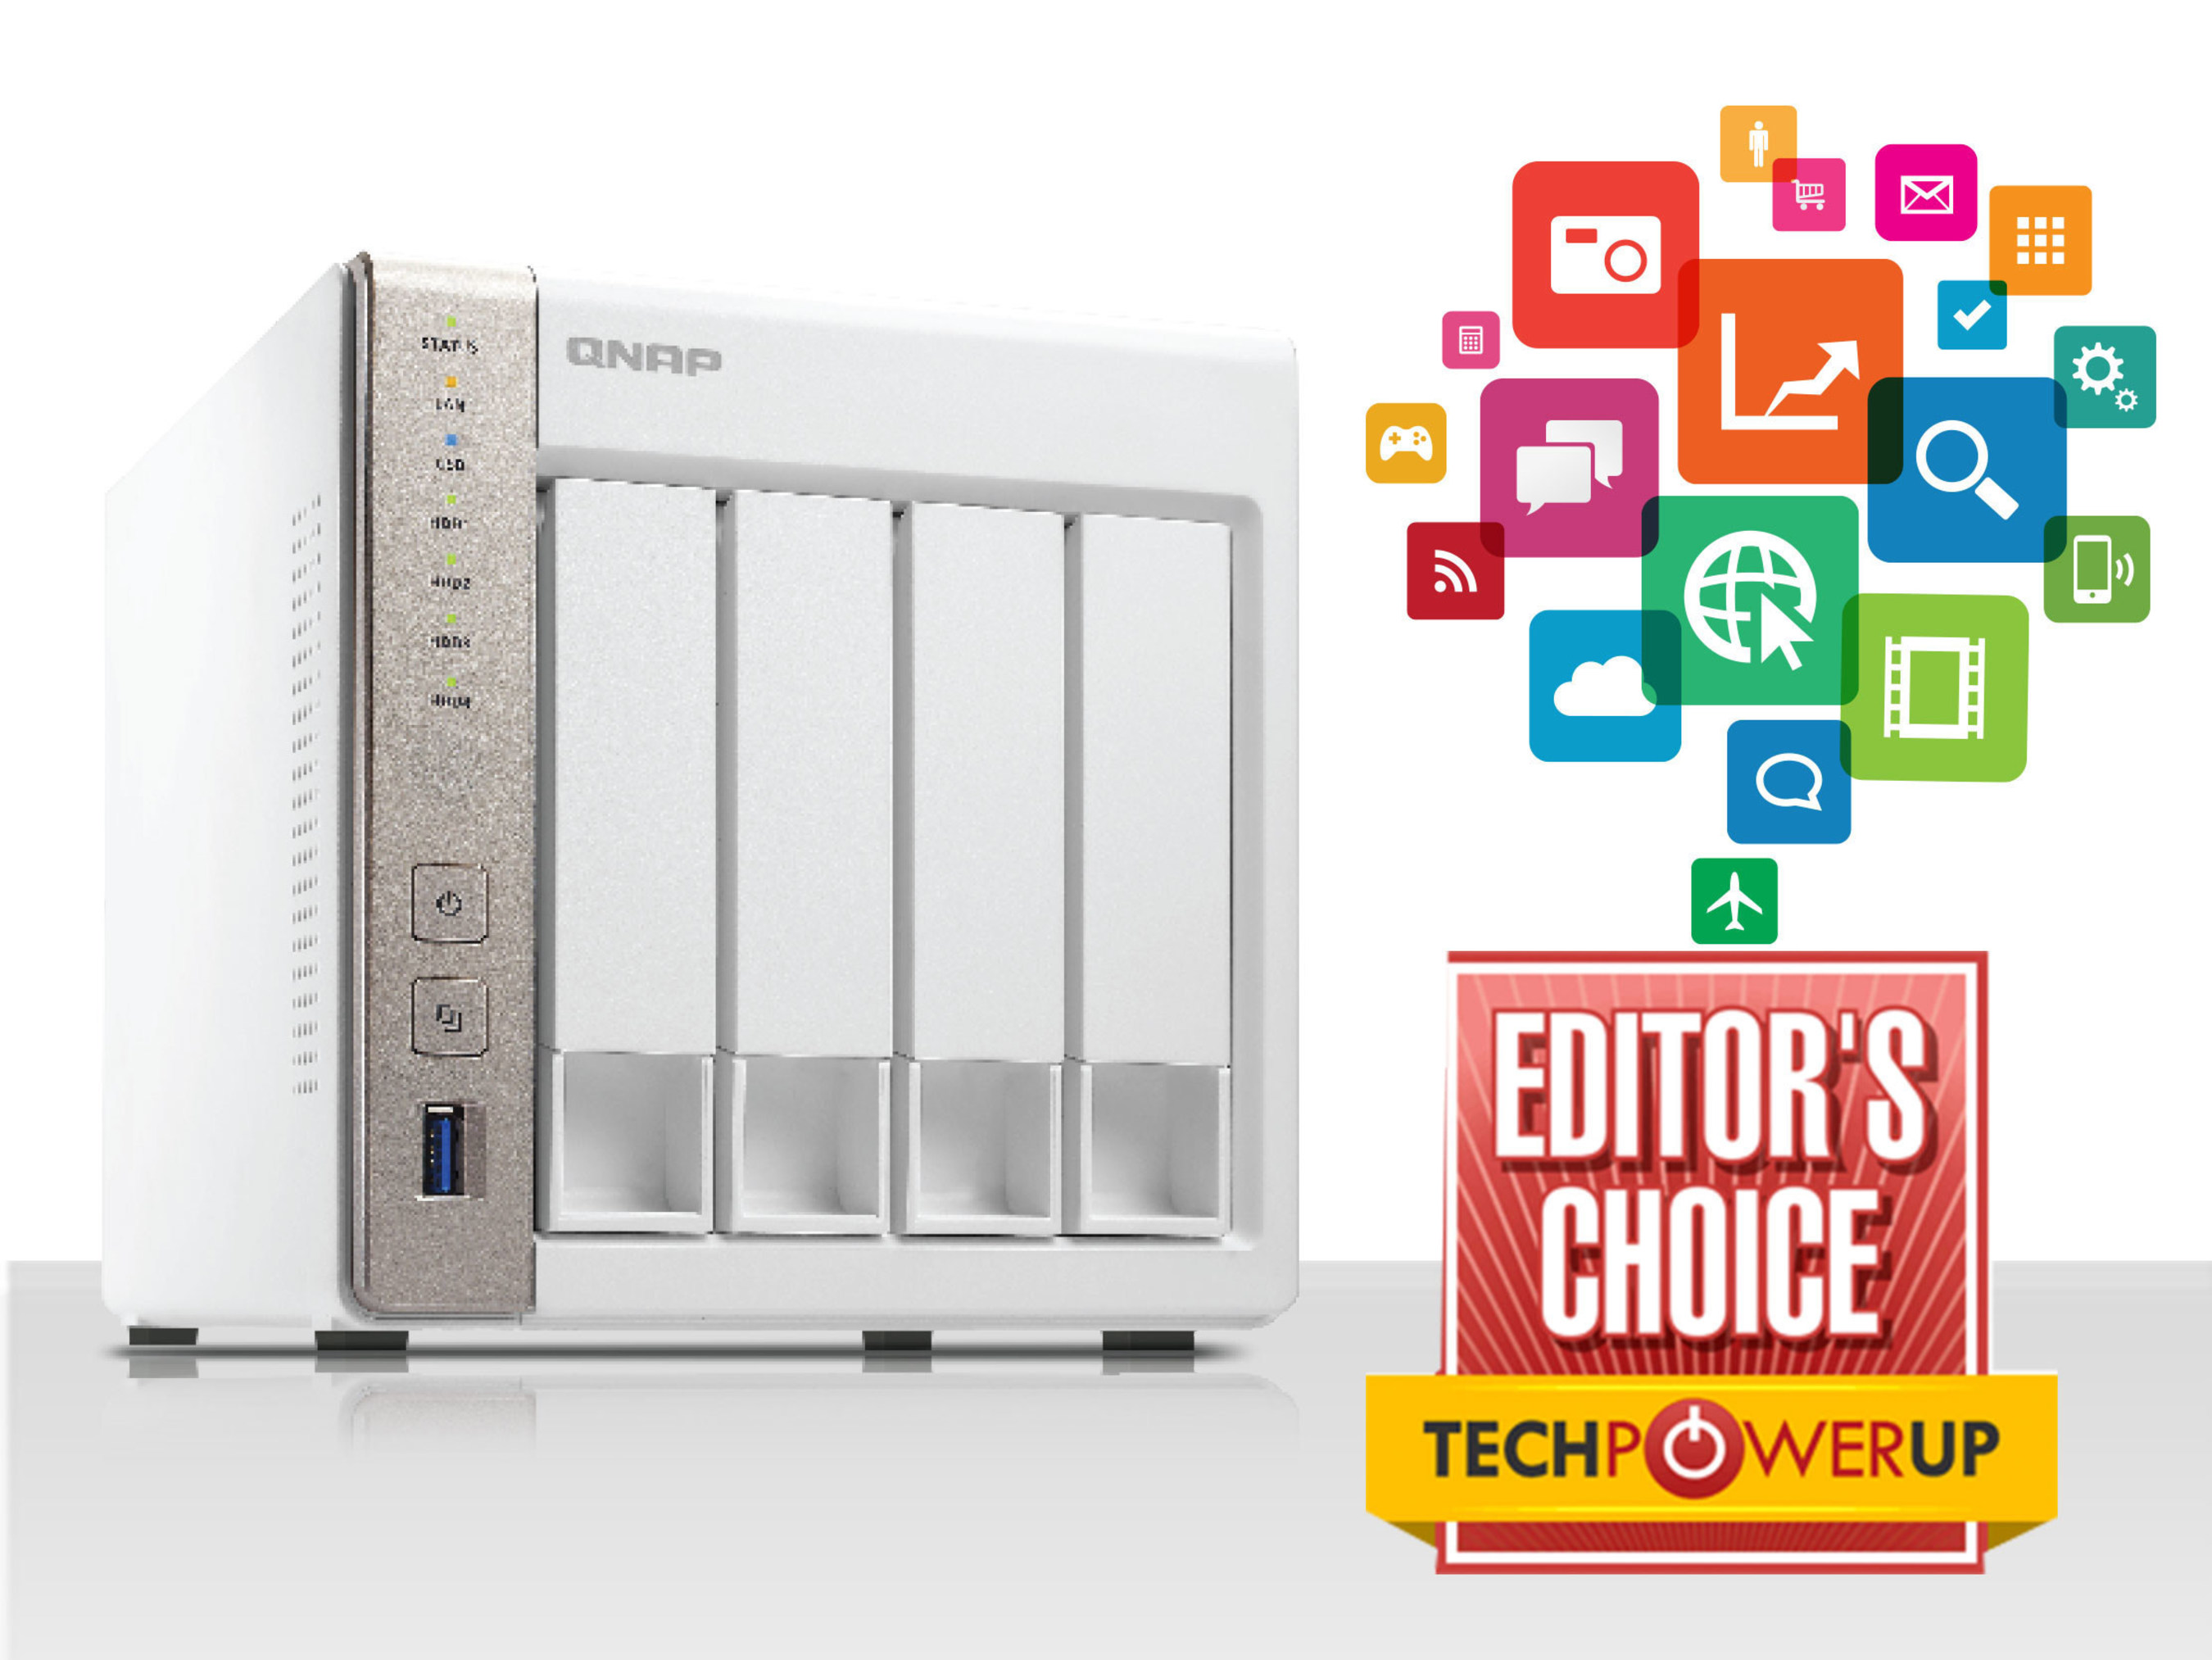 QNAP(R), Inc. is excited to announce that popular tech media outlet TECHPOWERUP has awarded the QNAP TS-451 the Editor's Choice award.